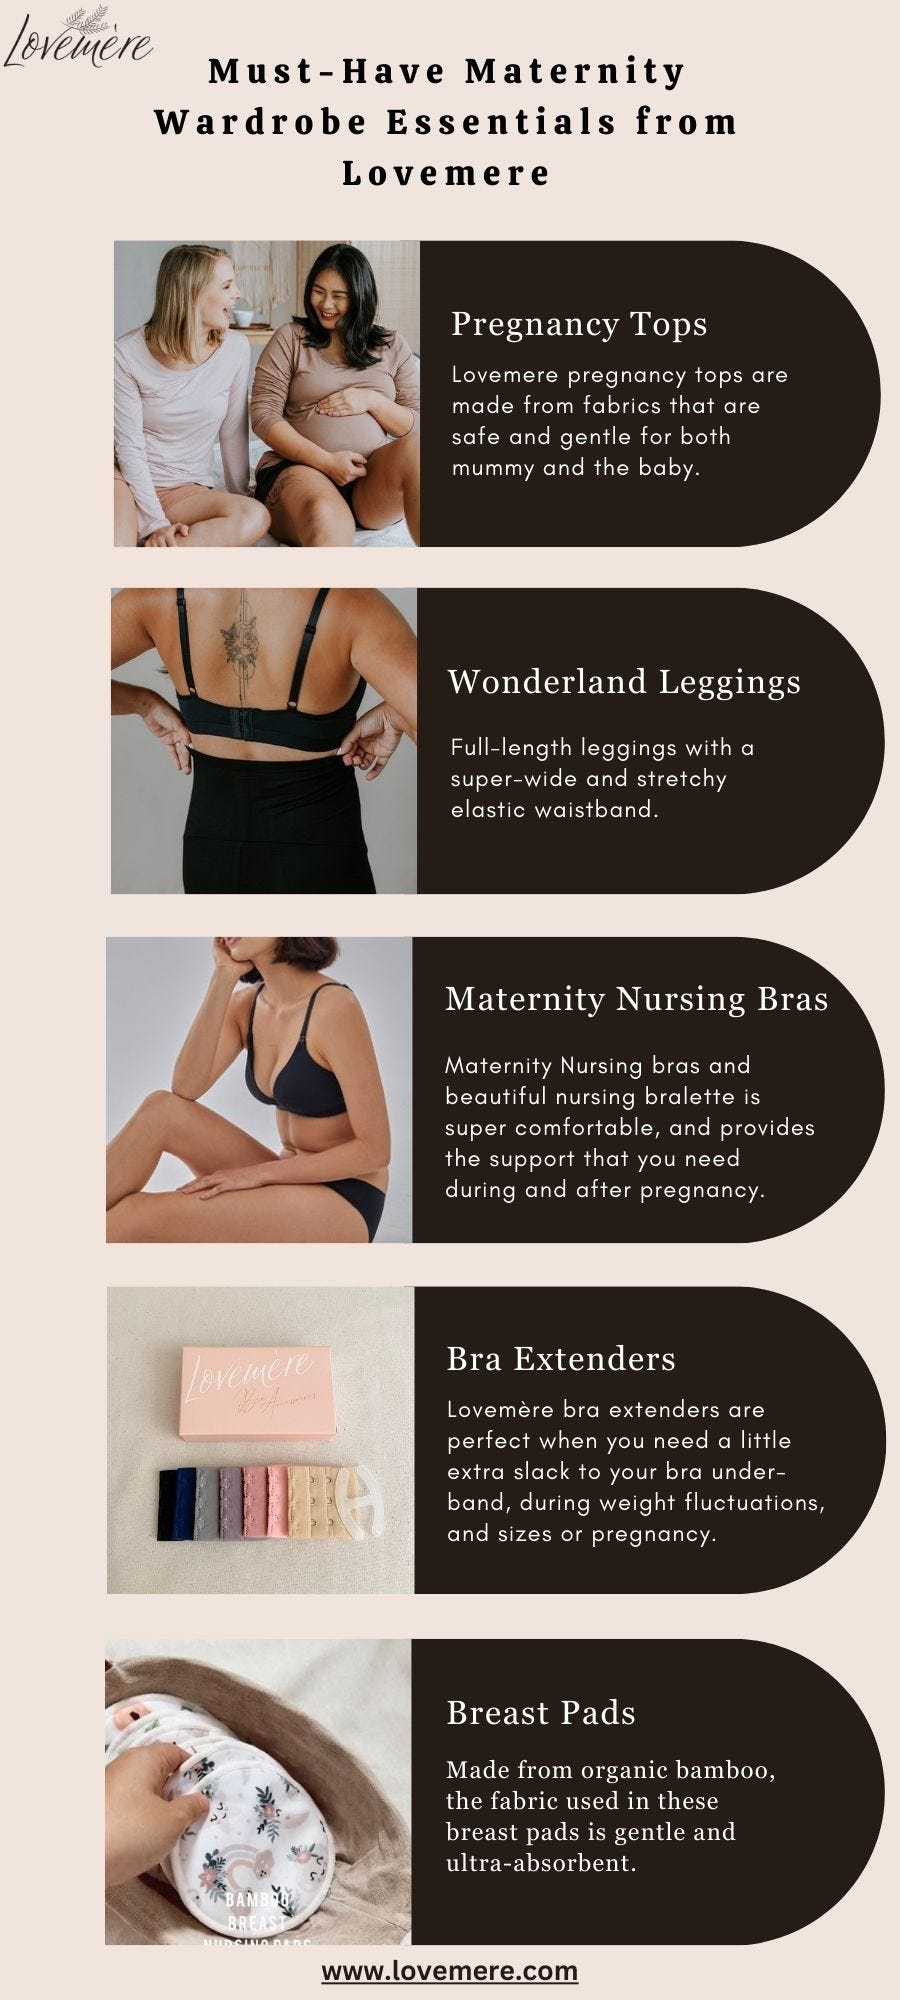 Must-Have Maternity Wardrobe Essentials from Lovemere - Lovemere - Best  Online Maternity Clothing Store - Medium